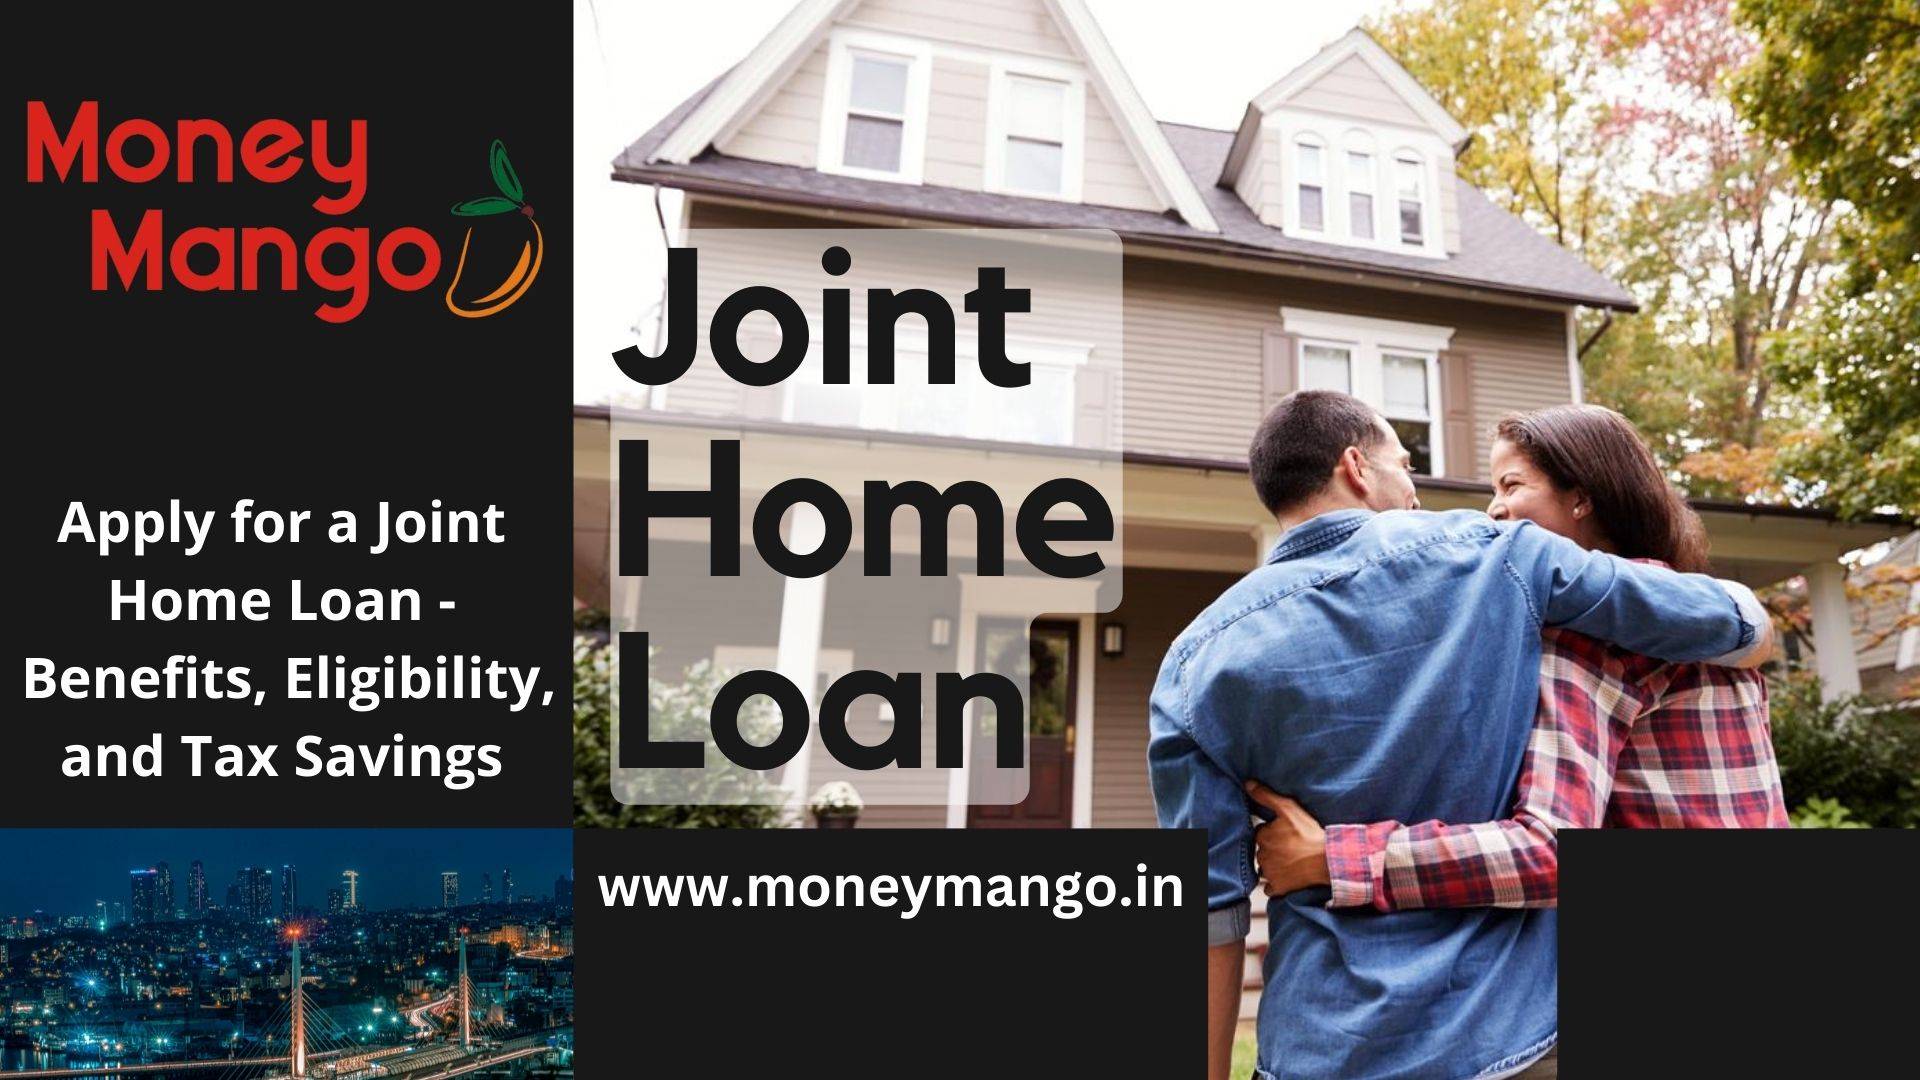 Apply for Joint Home Loan – Benefits, Eligibility, and Tax Savings